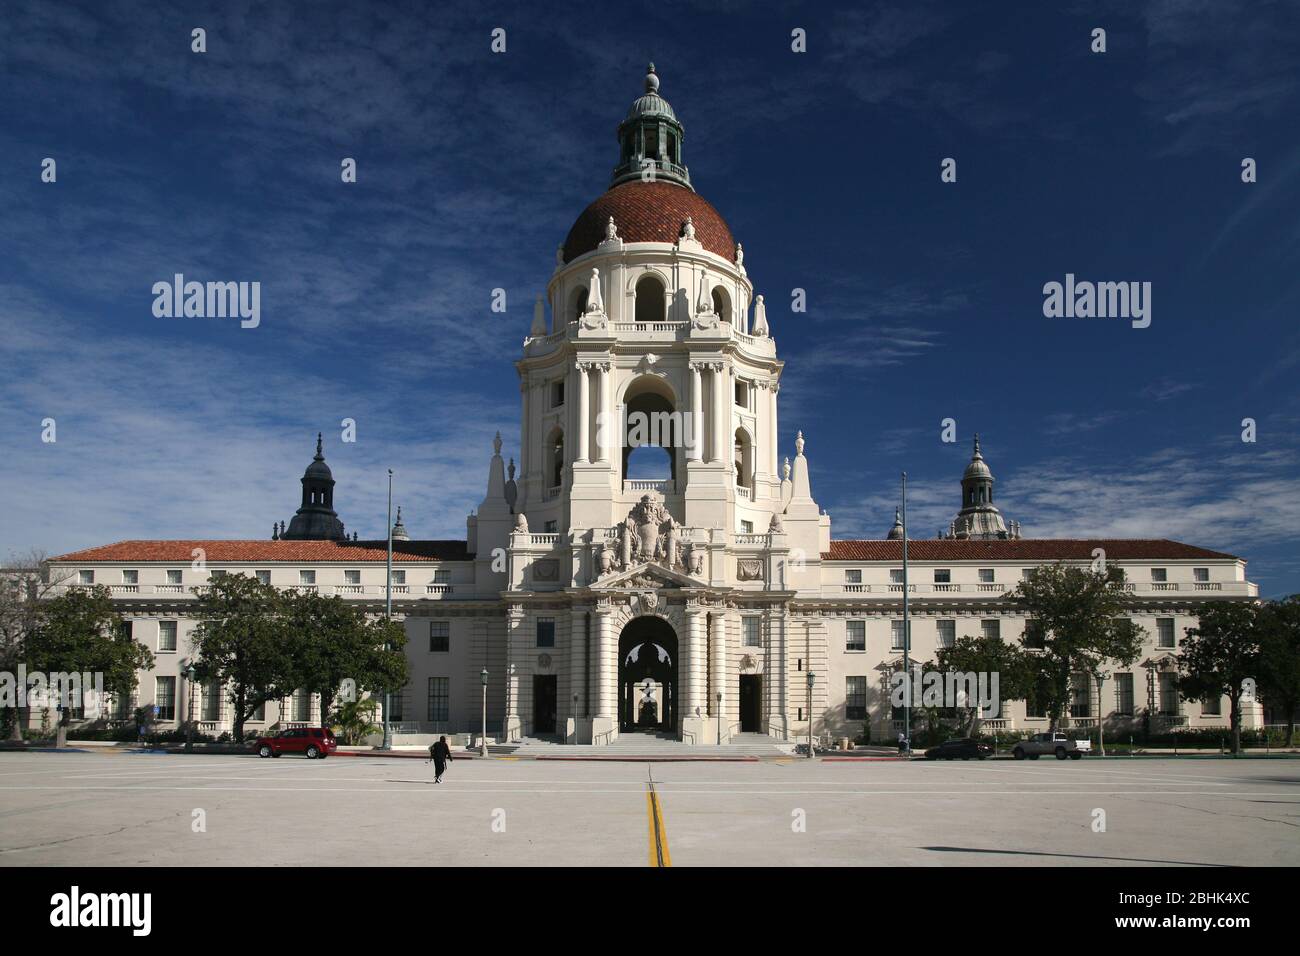 View of Pasadena, California City Hall building, an example of Spanish Revival architecture Stock Photo